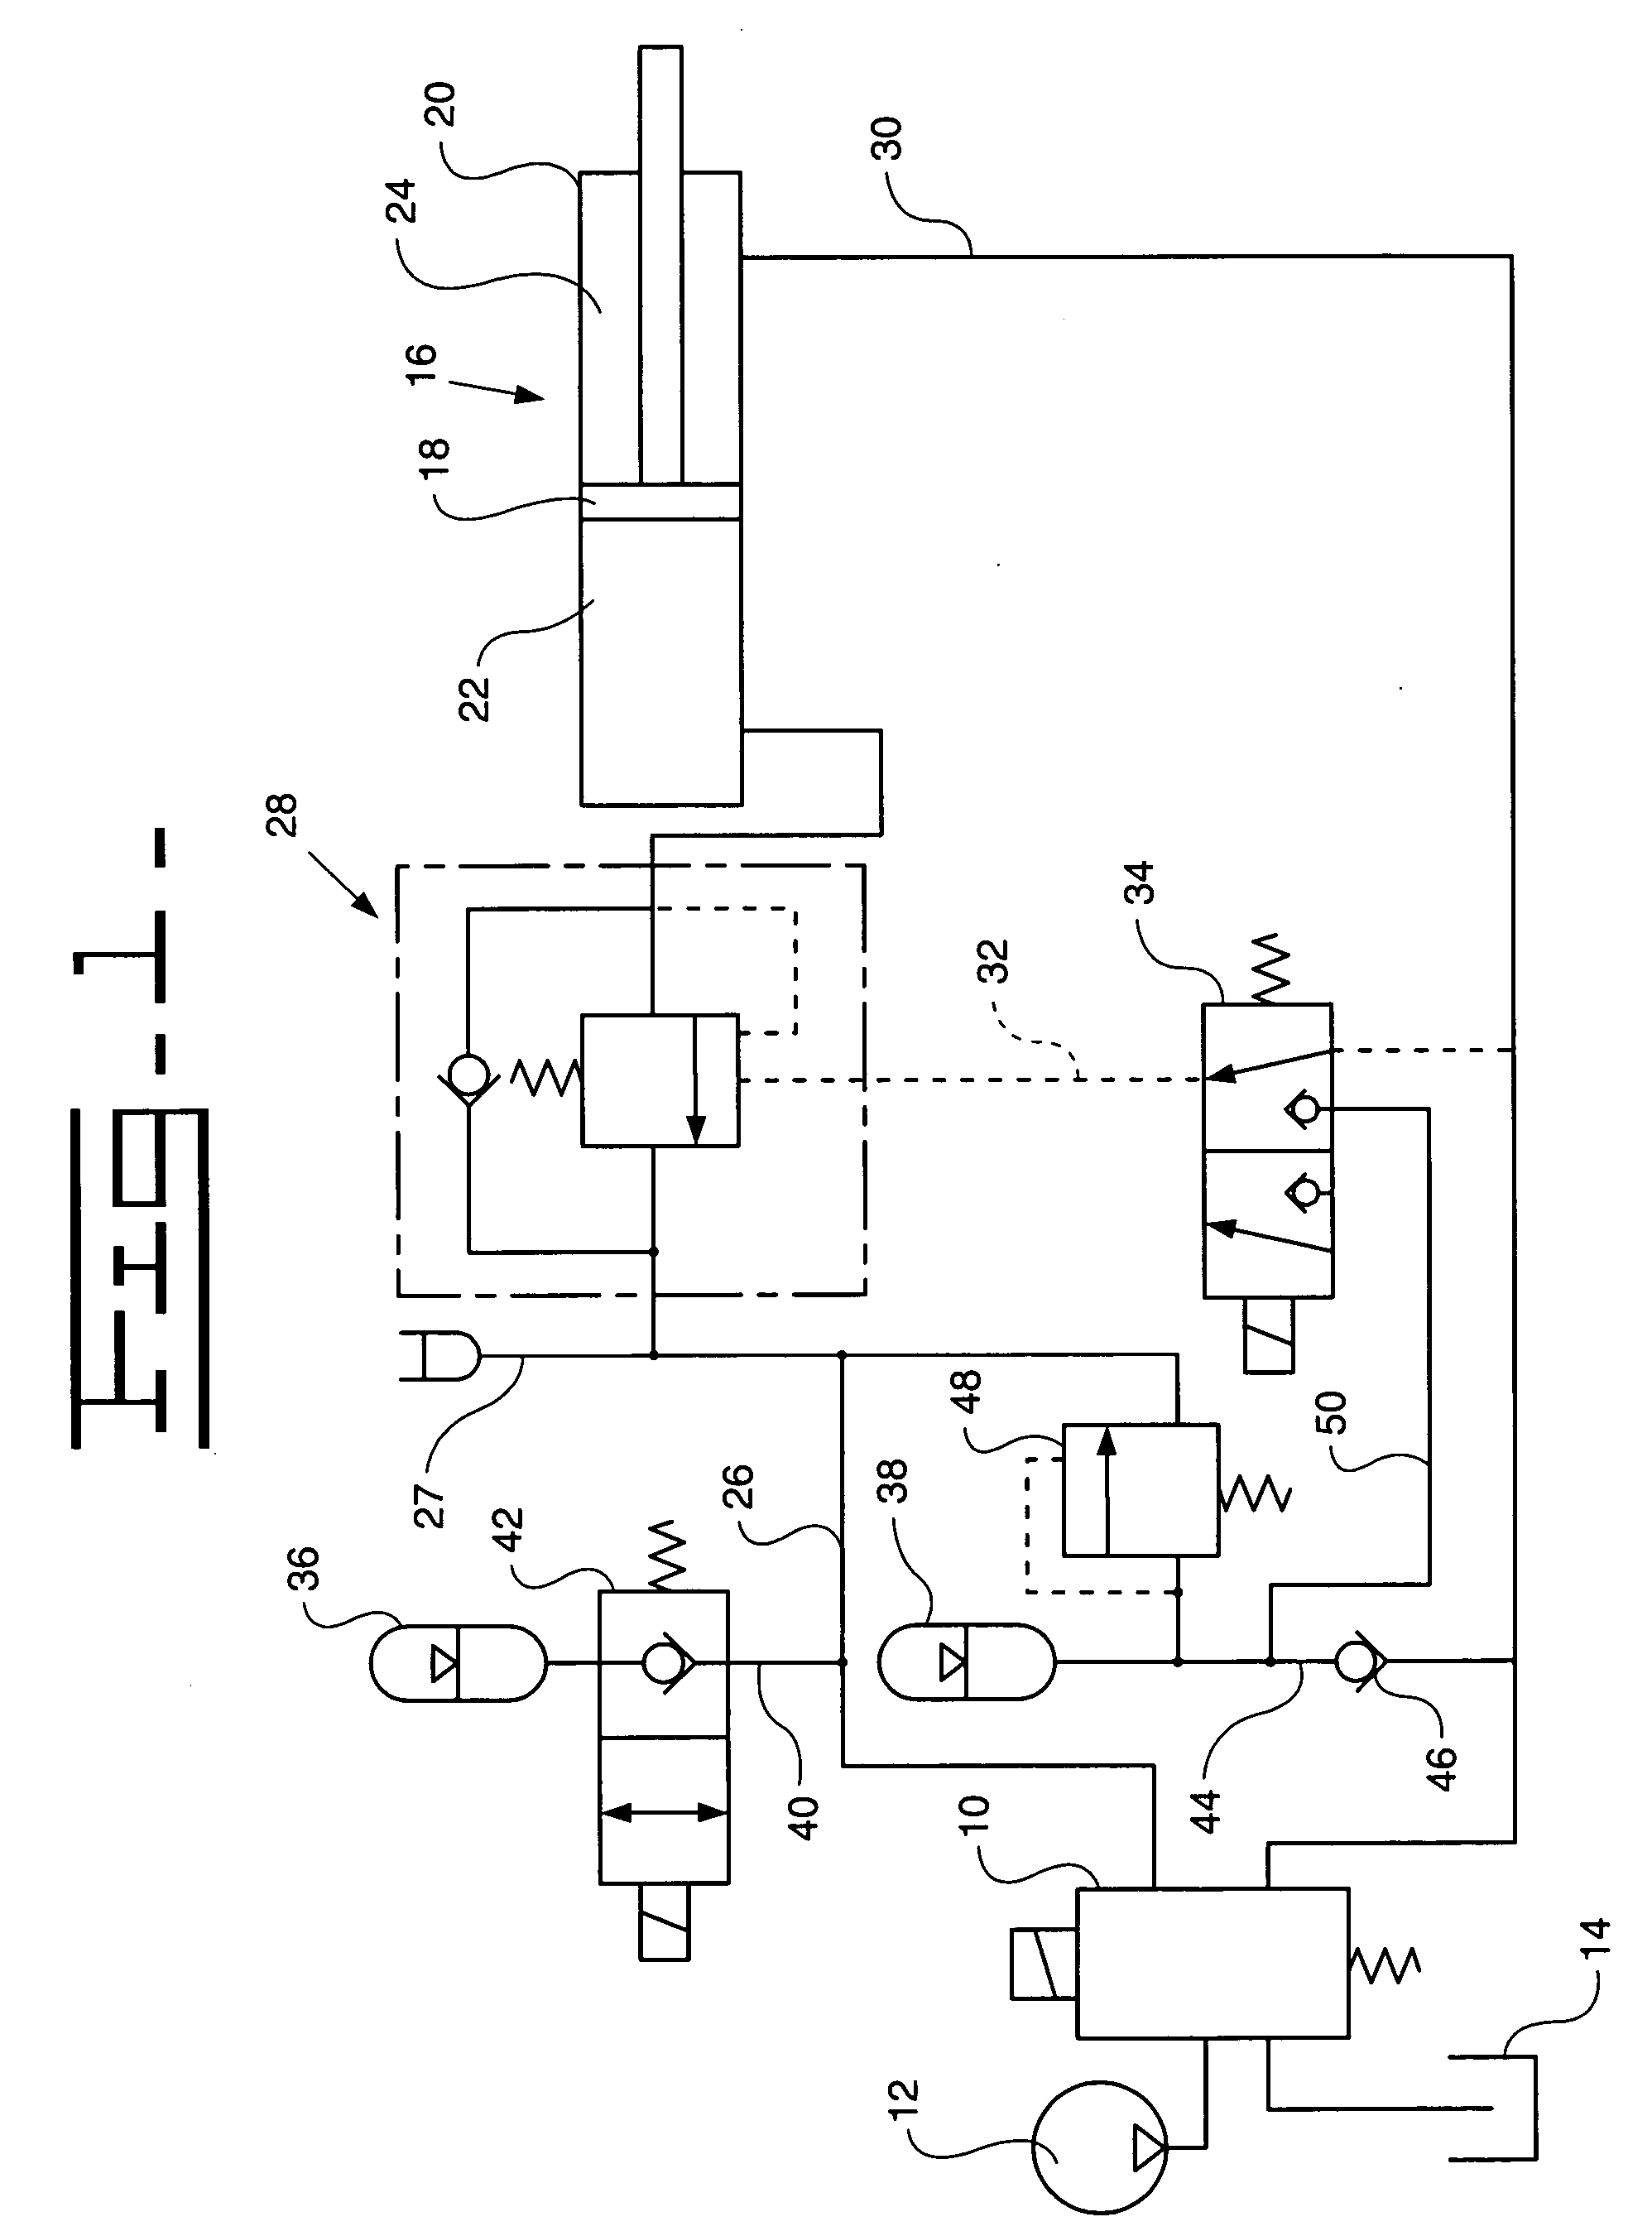 Ride control circuit for a work machine